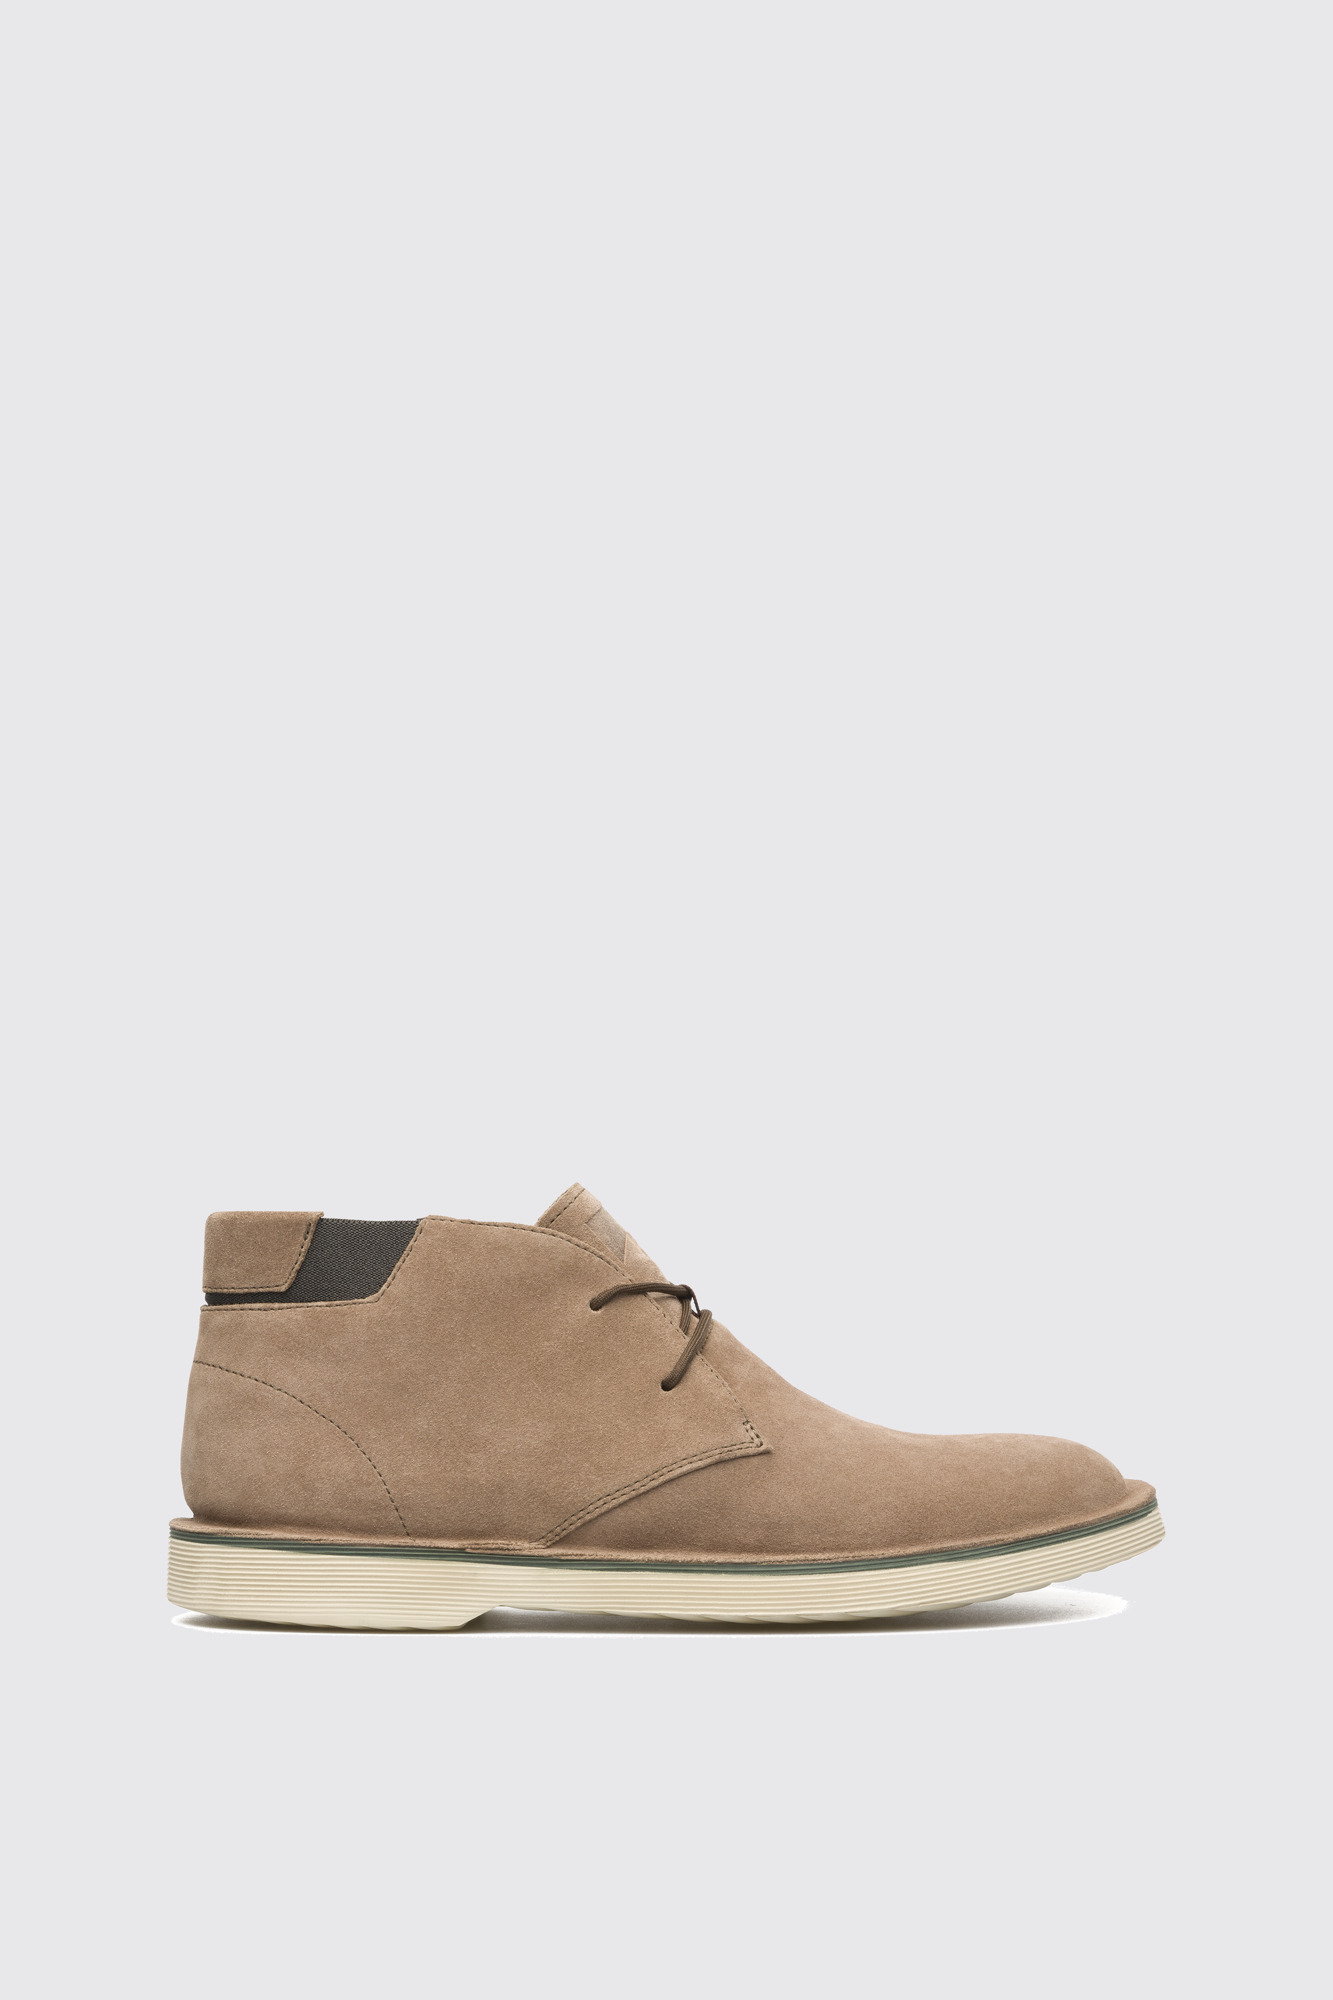 Morrys Brown Ankle Boots for Men - Spring/Summer collection - Camper Iceland